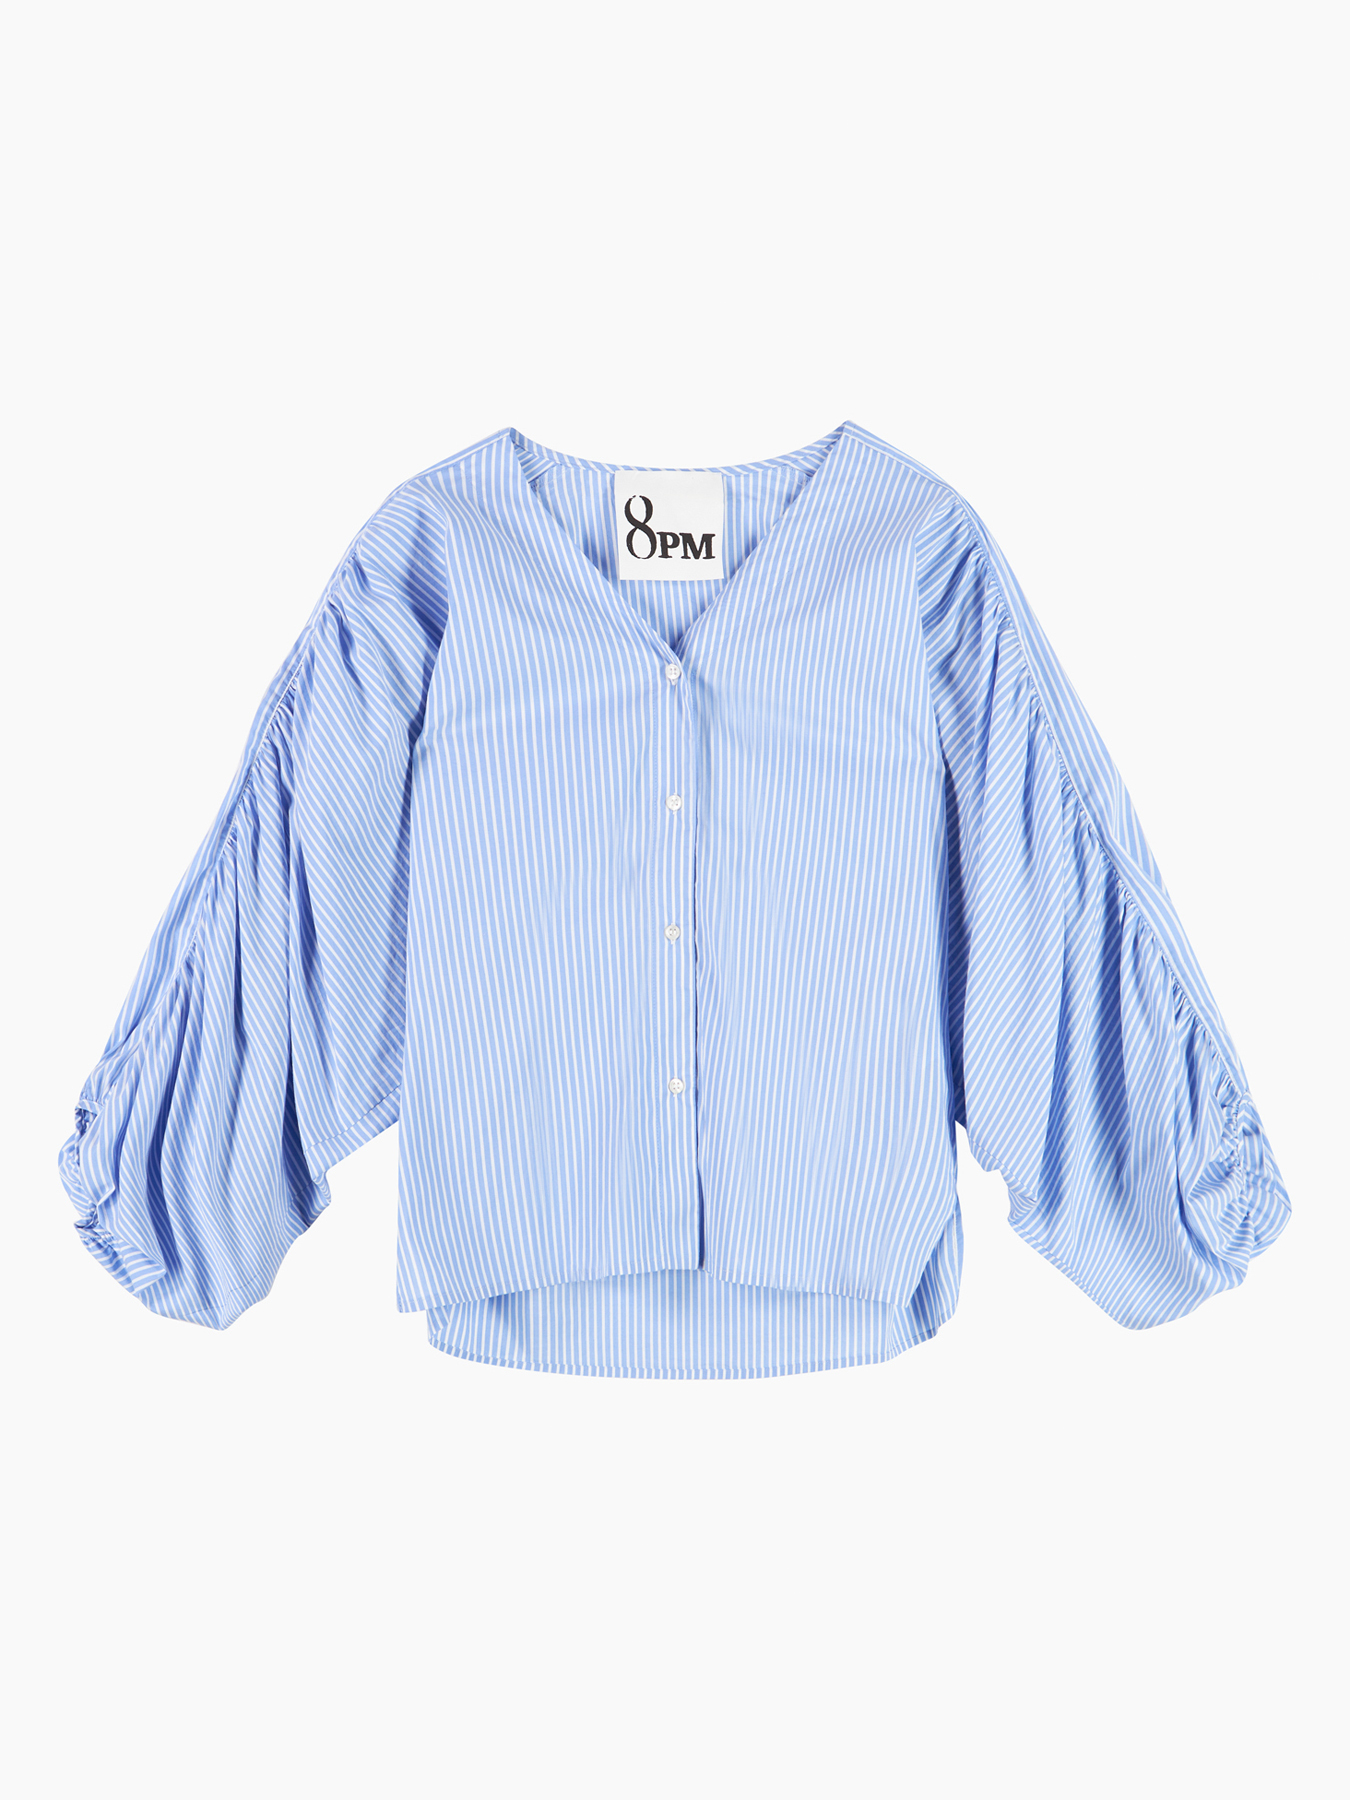 Women's Shirts & Blouses | 8pm Official Store